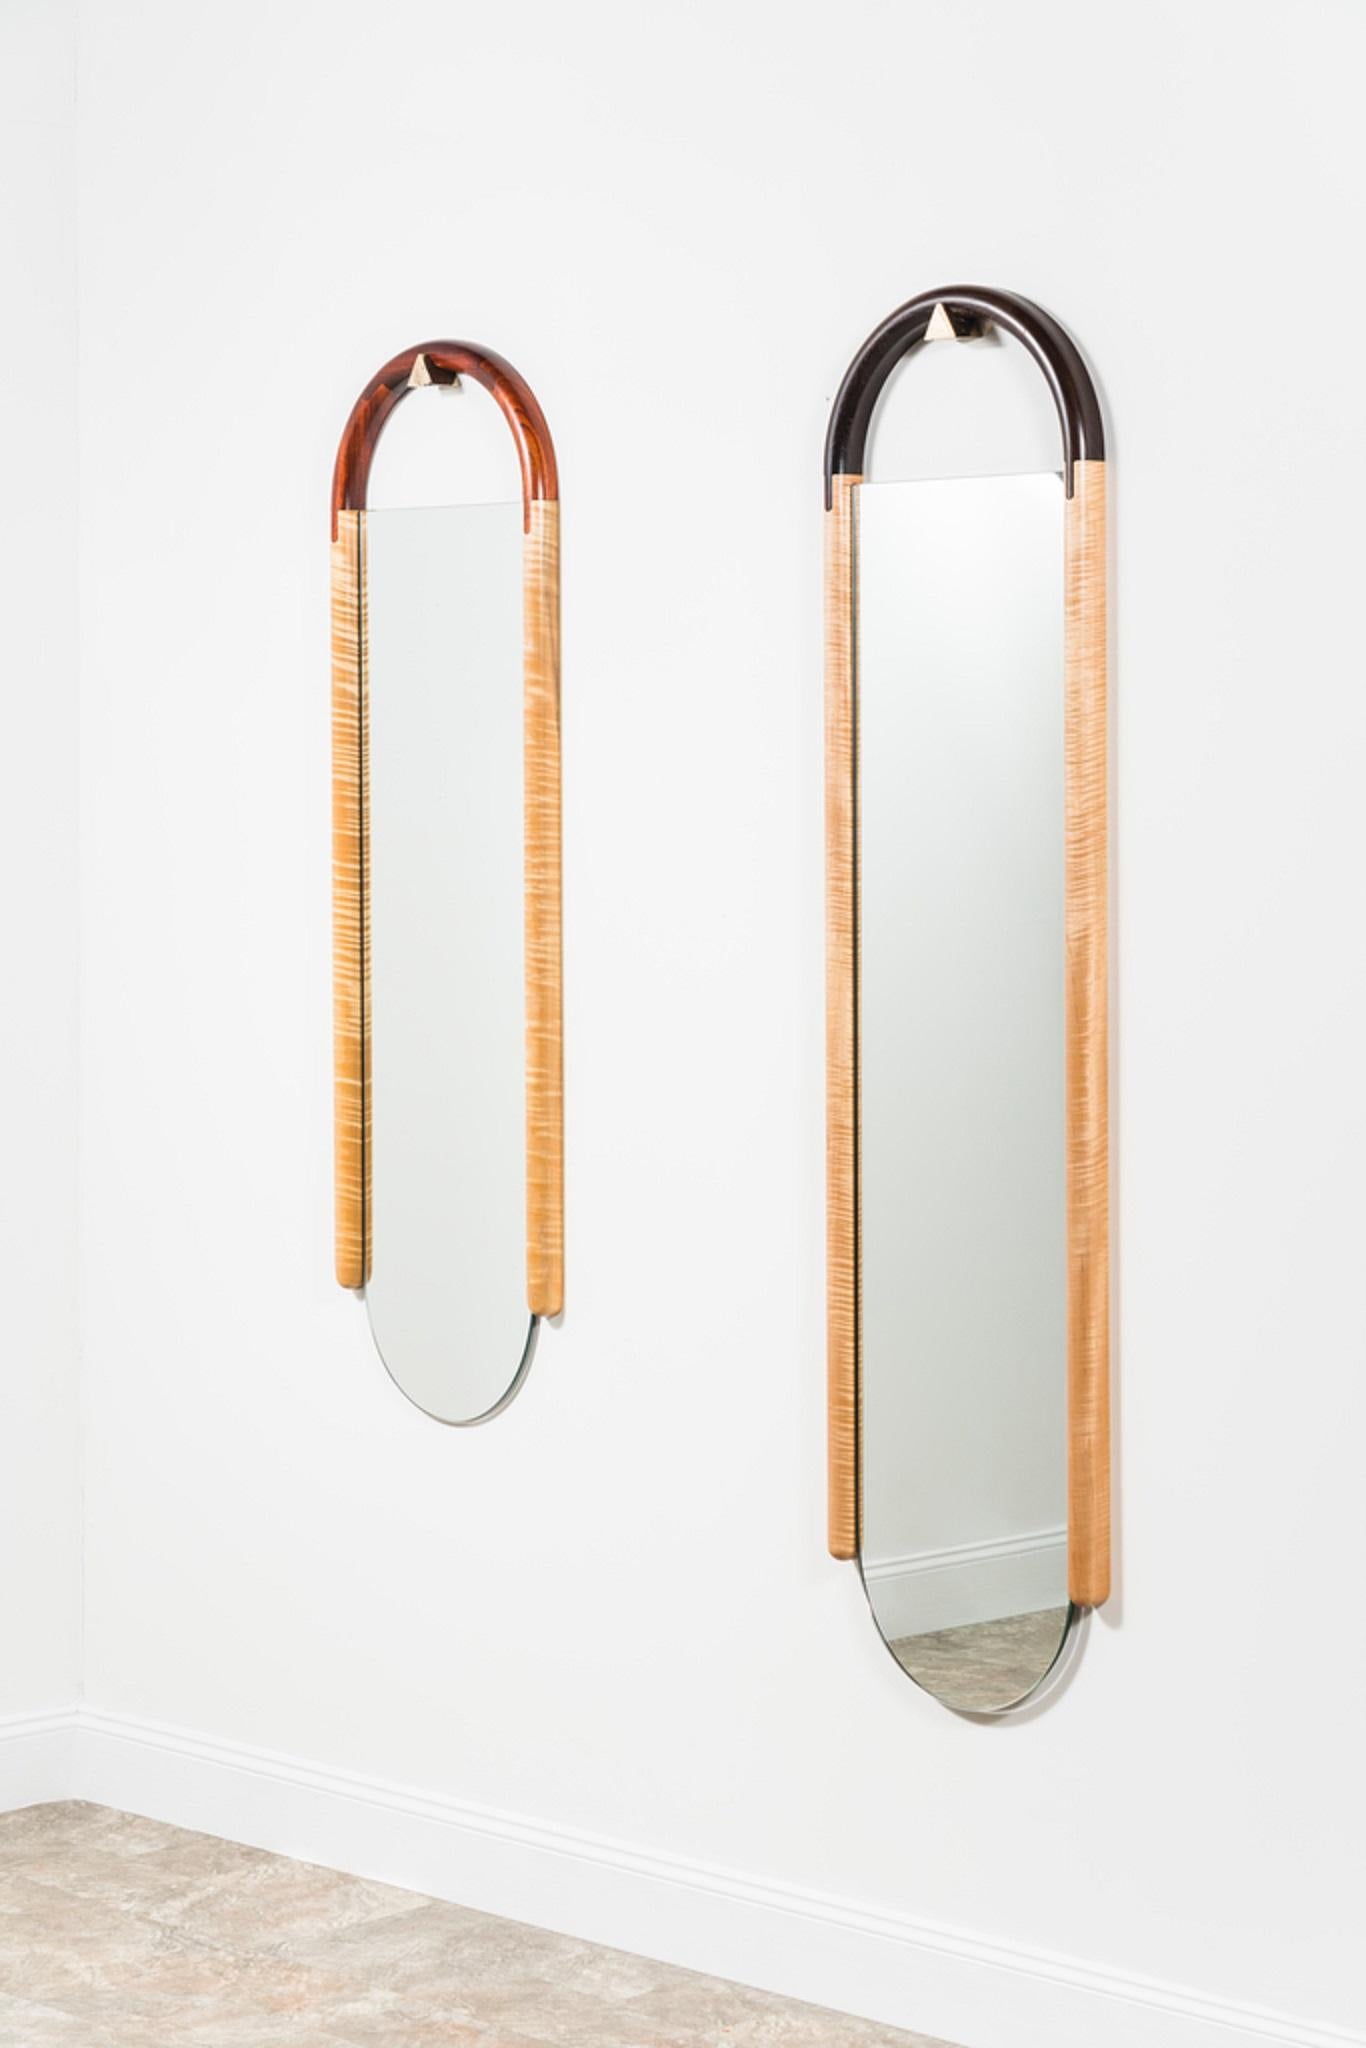 Hand-Crafted Tall Halo Mirror, Birnam Wood Studio, Represented by Tuleste Factory For Sale